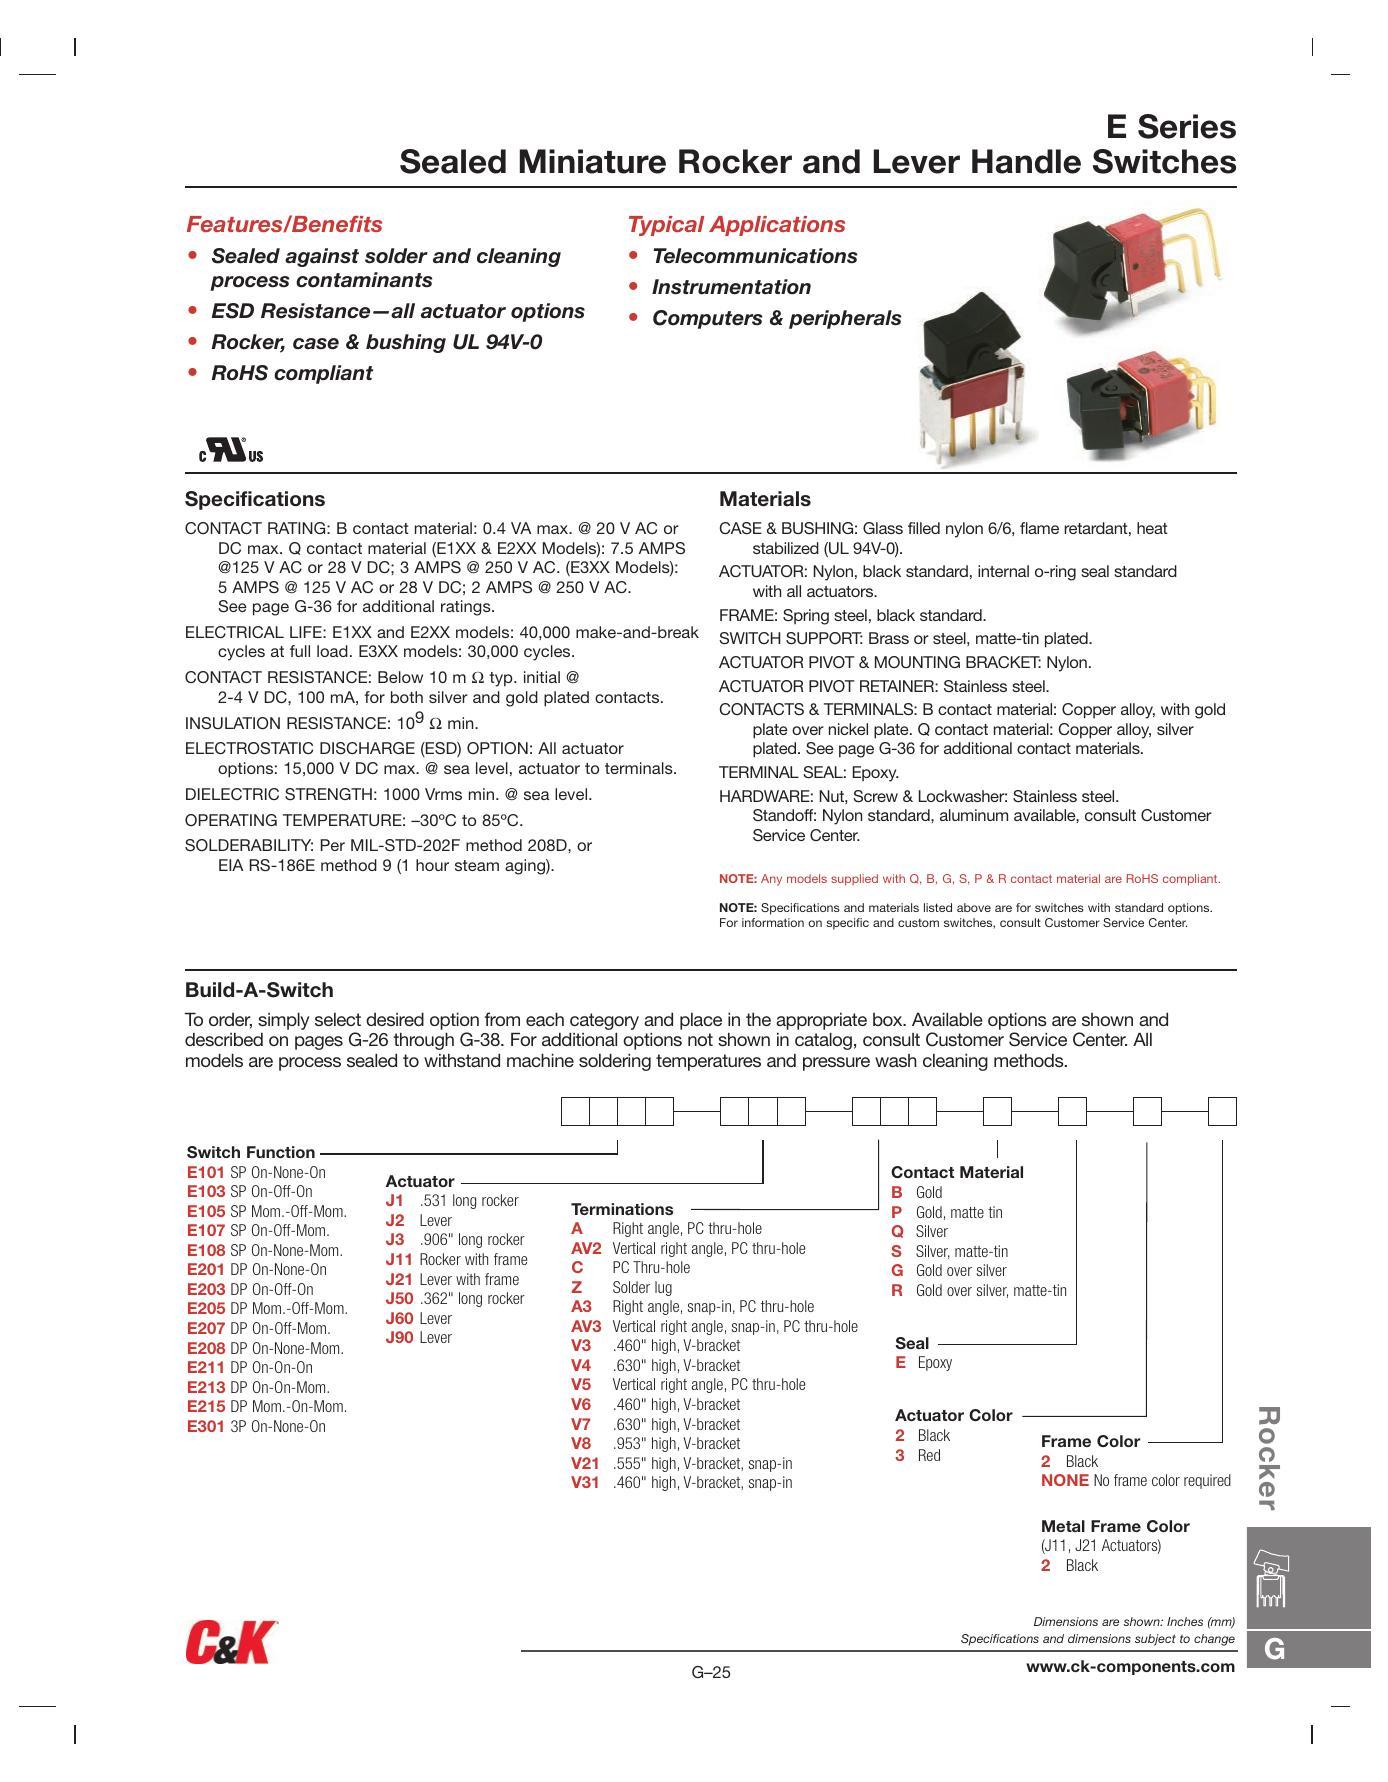 e-series-sealed-miniature-rocker-and-lever-handle-switches.pdf